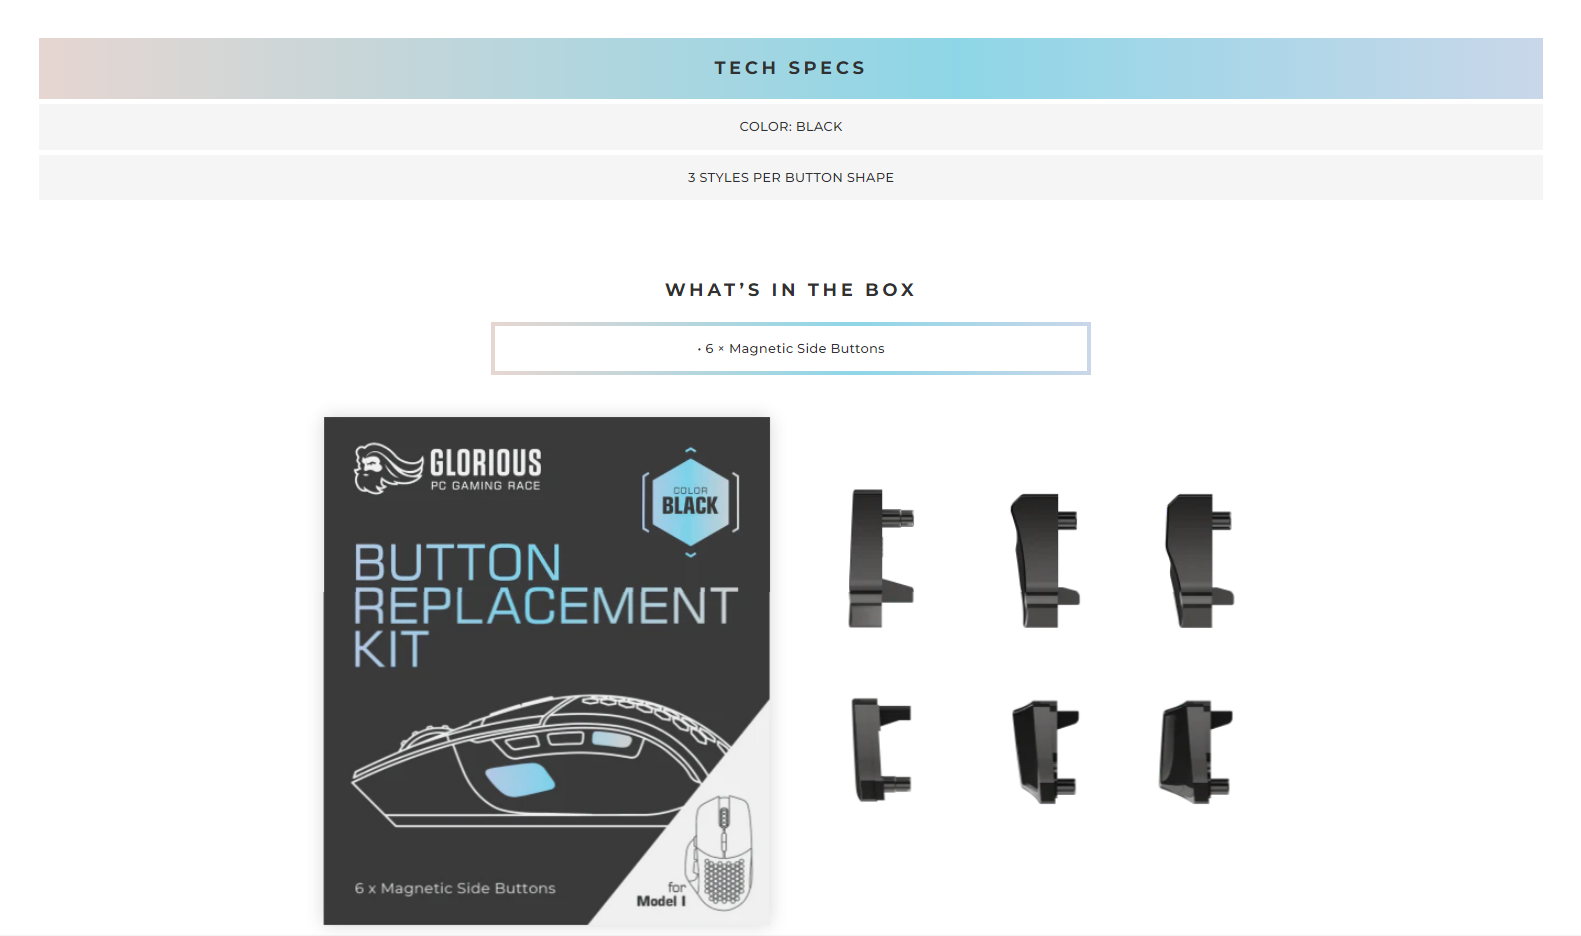 A large marketing image providing additional information about the product Glorious Model I Button Replacement Kit - Black - Additional alt info not provided